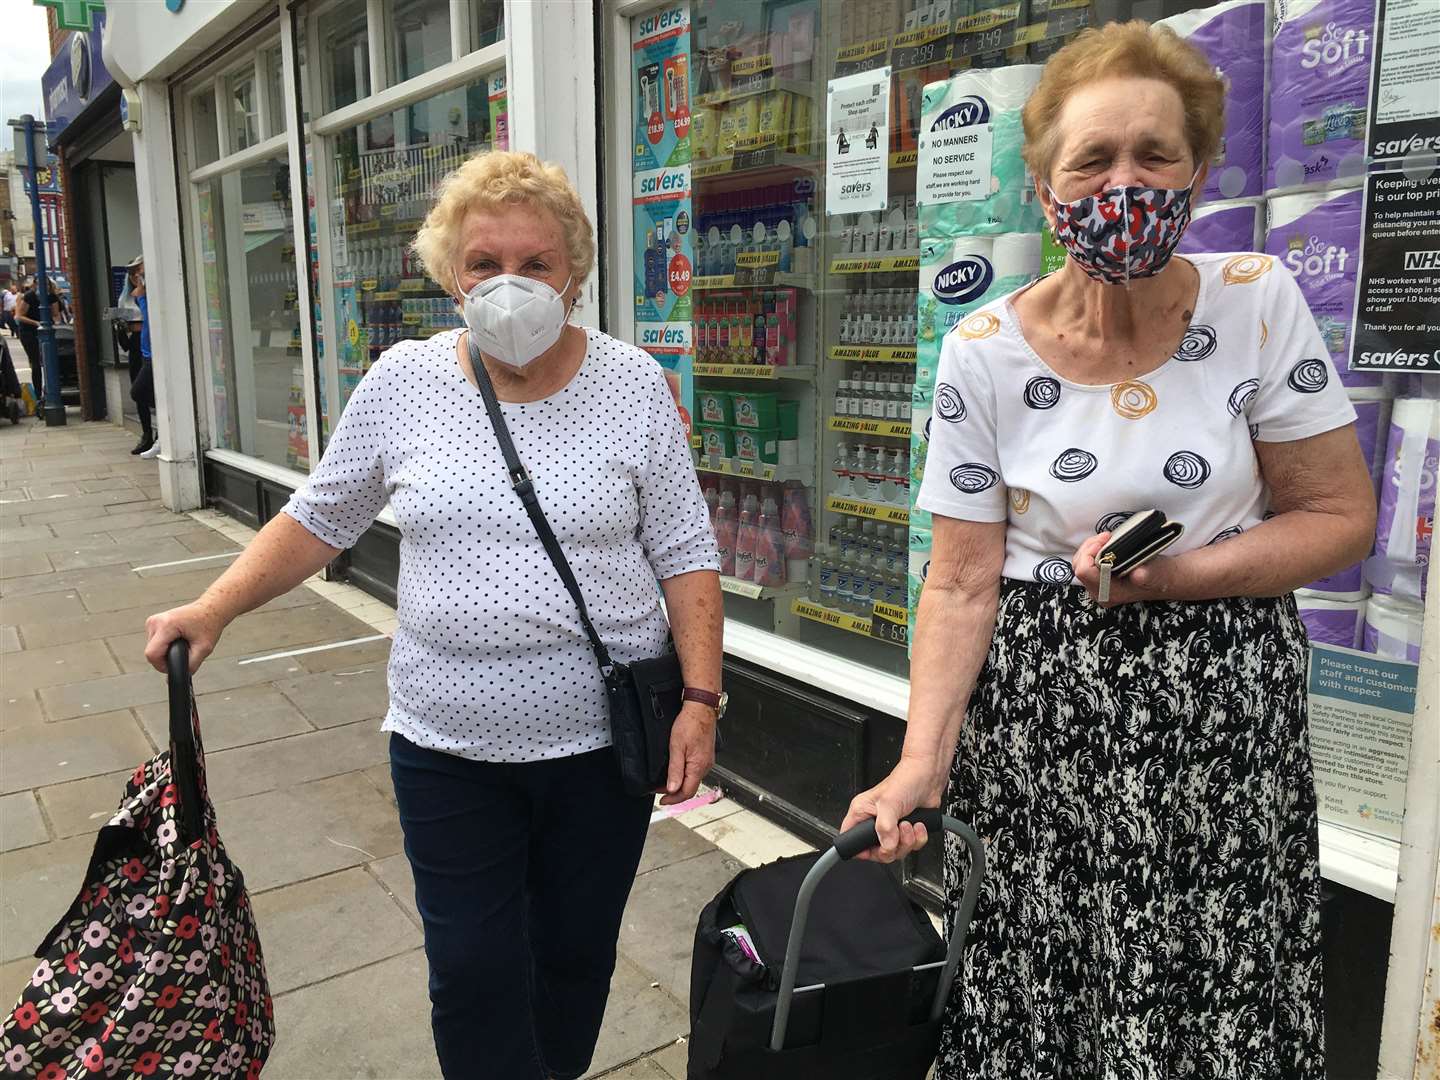 Wearing face masks on the Isle of Sheppey